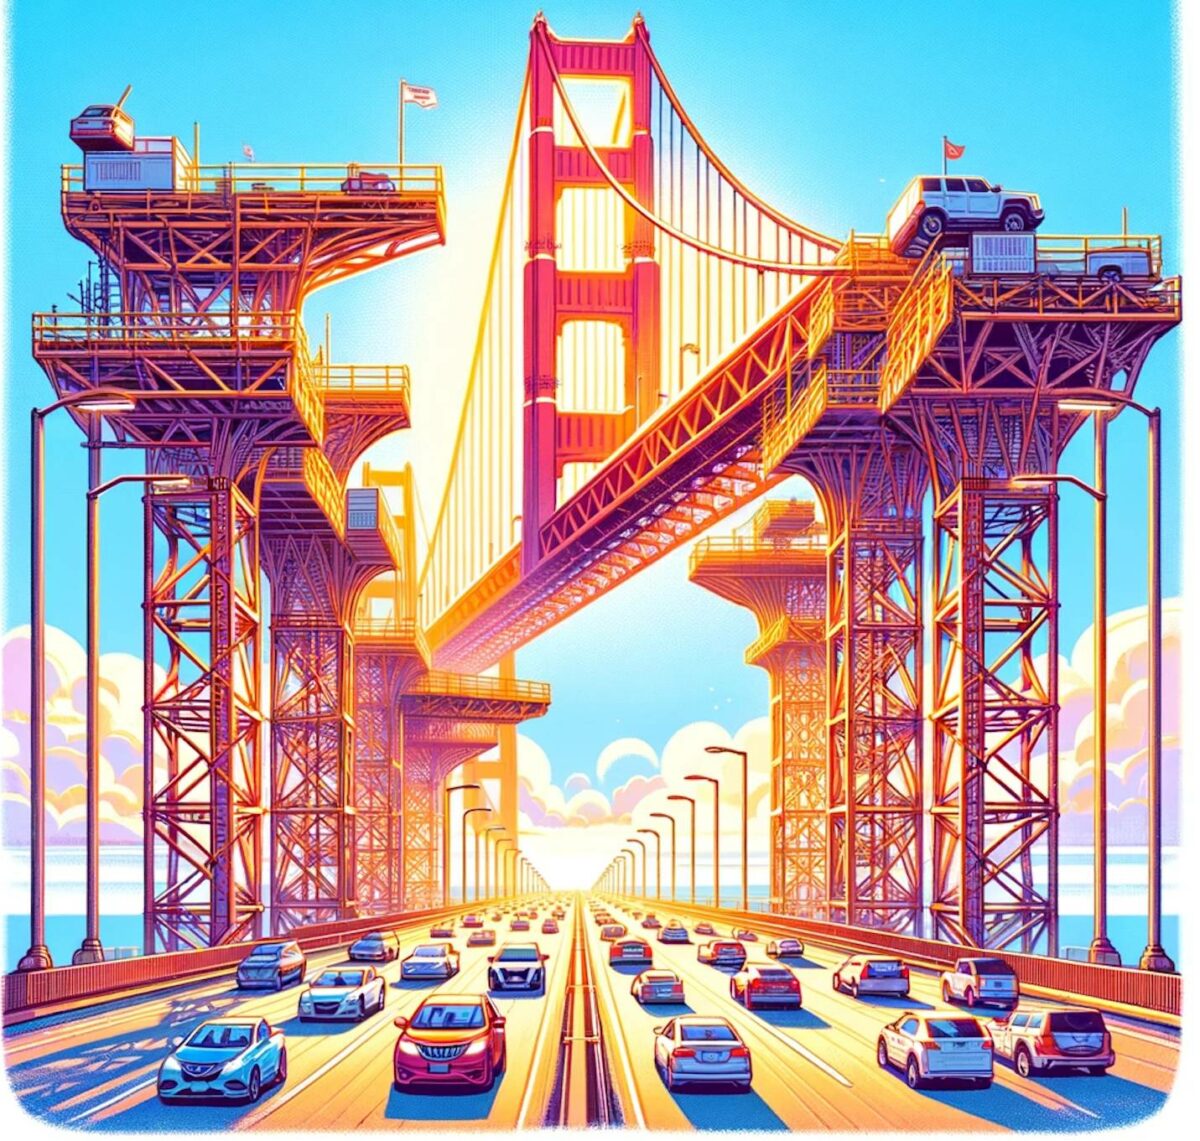 Golden Gate Bridge under clear skies, supported by exaggerated beams, with cars crossing over.